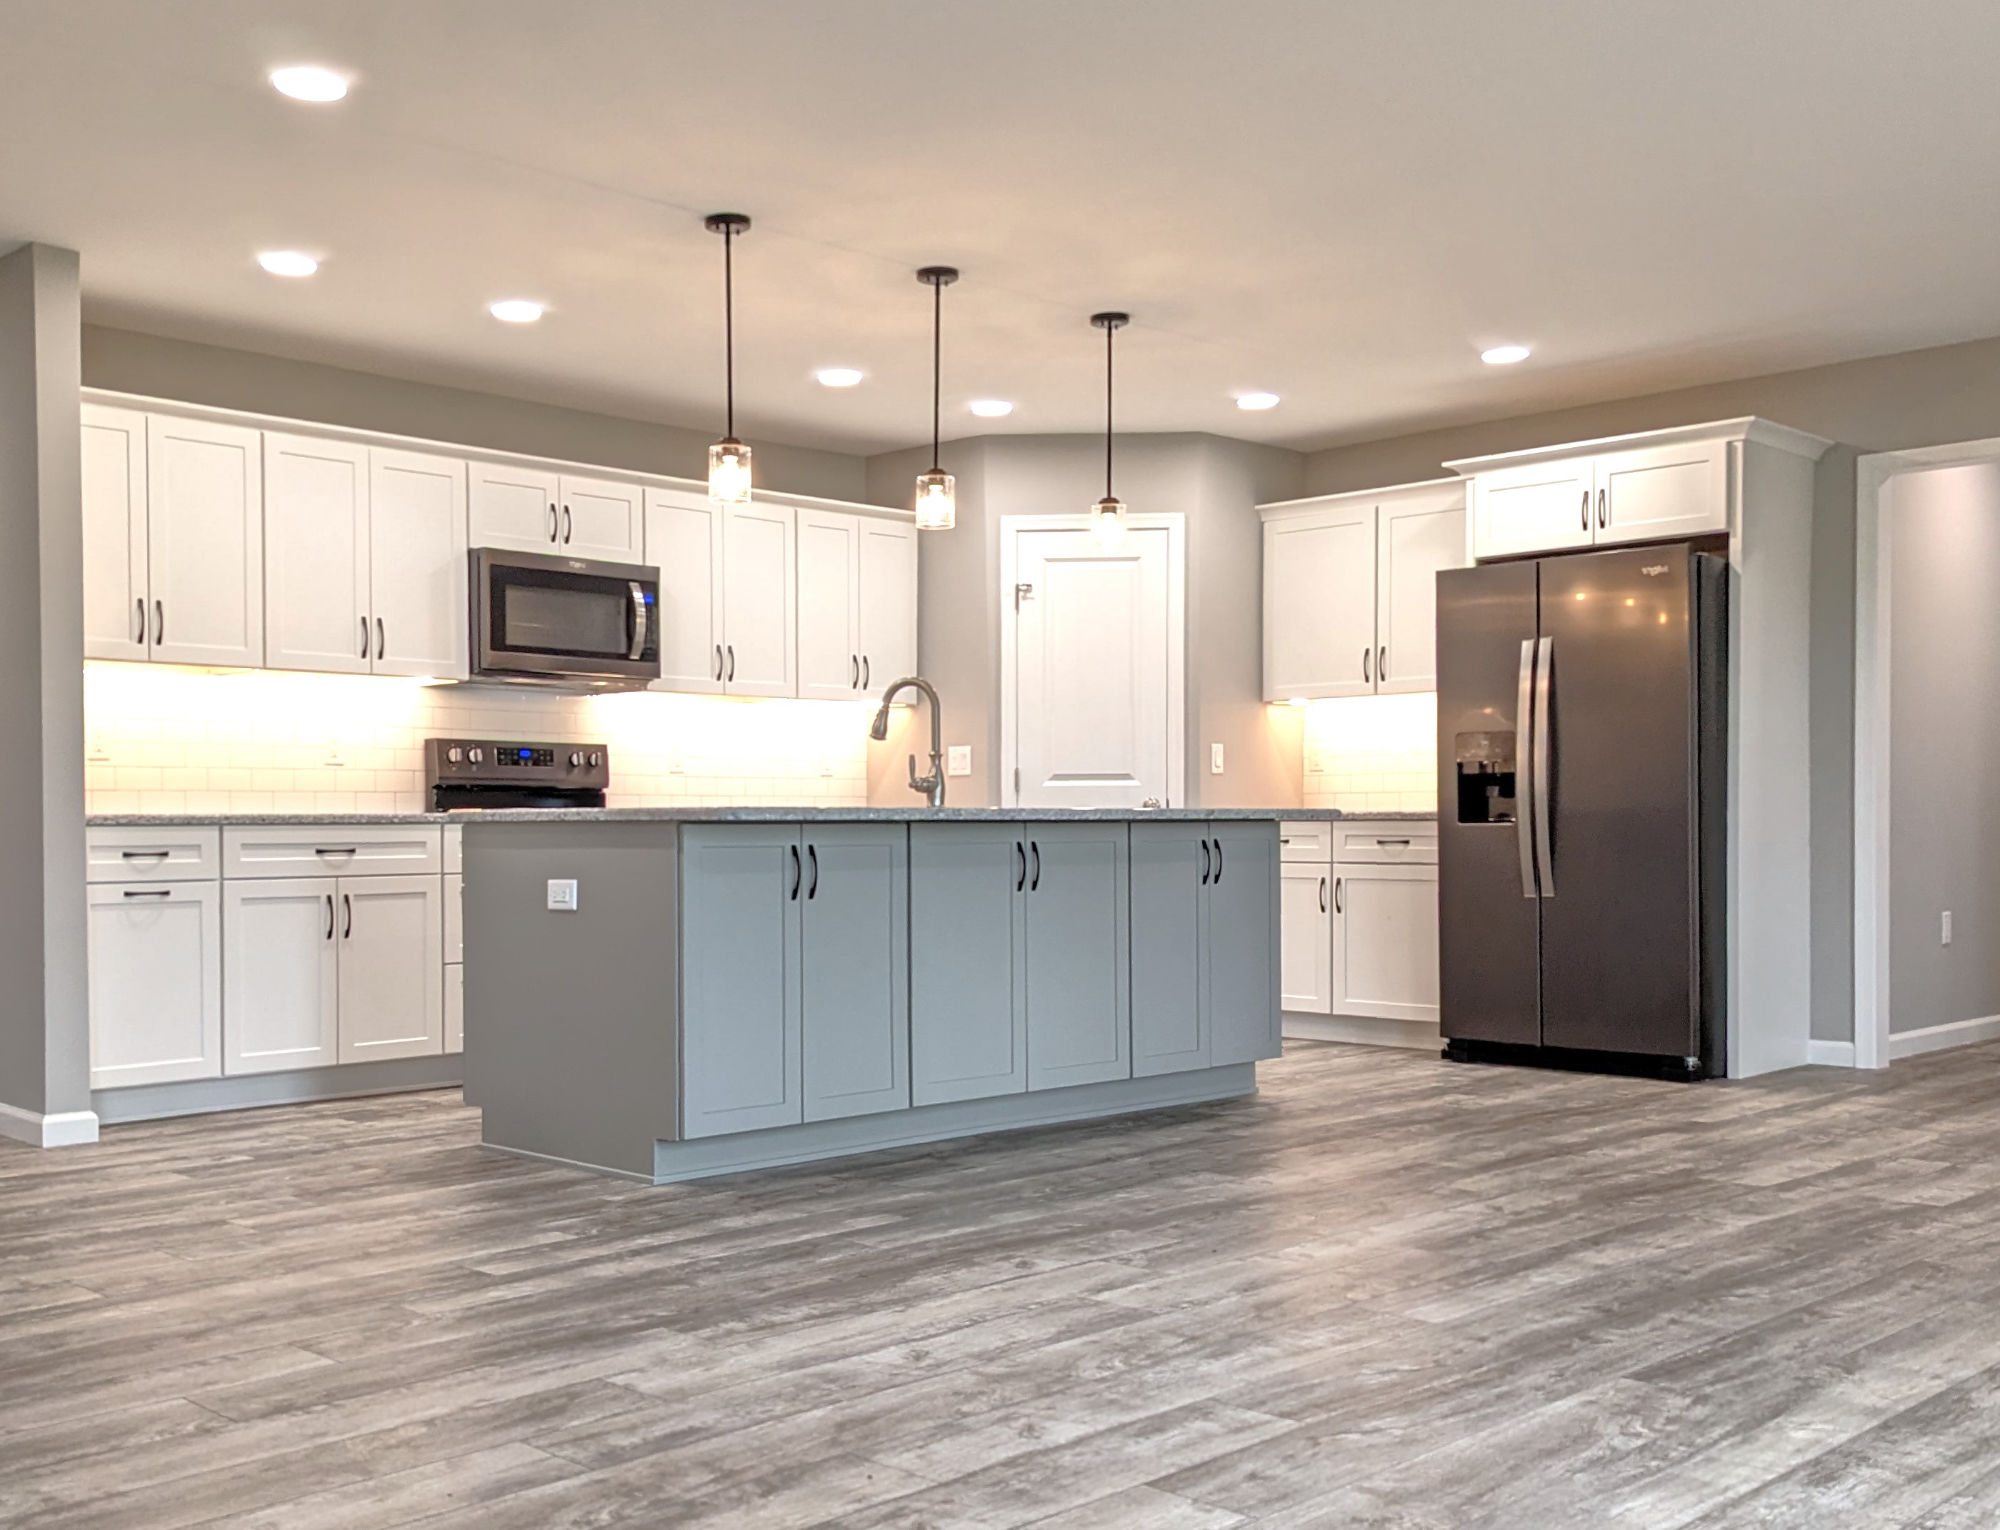 Seely Homes Neal Kitchen Mantra Omni Snow Mineral Gray Island Cabinets Doors Black Stainless Appliances Corner Pantry Winslow Pendants Under Cabinet Lighting Timberline Roclock LVP Floor